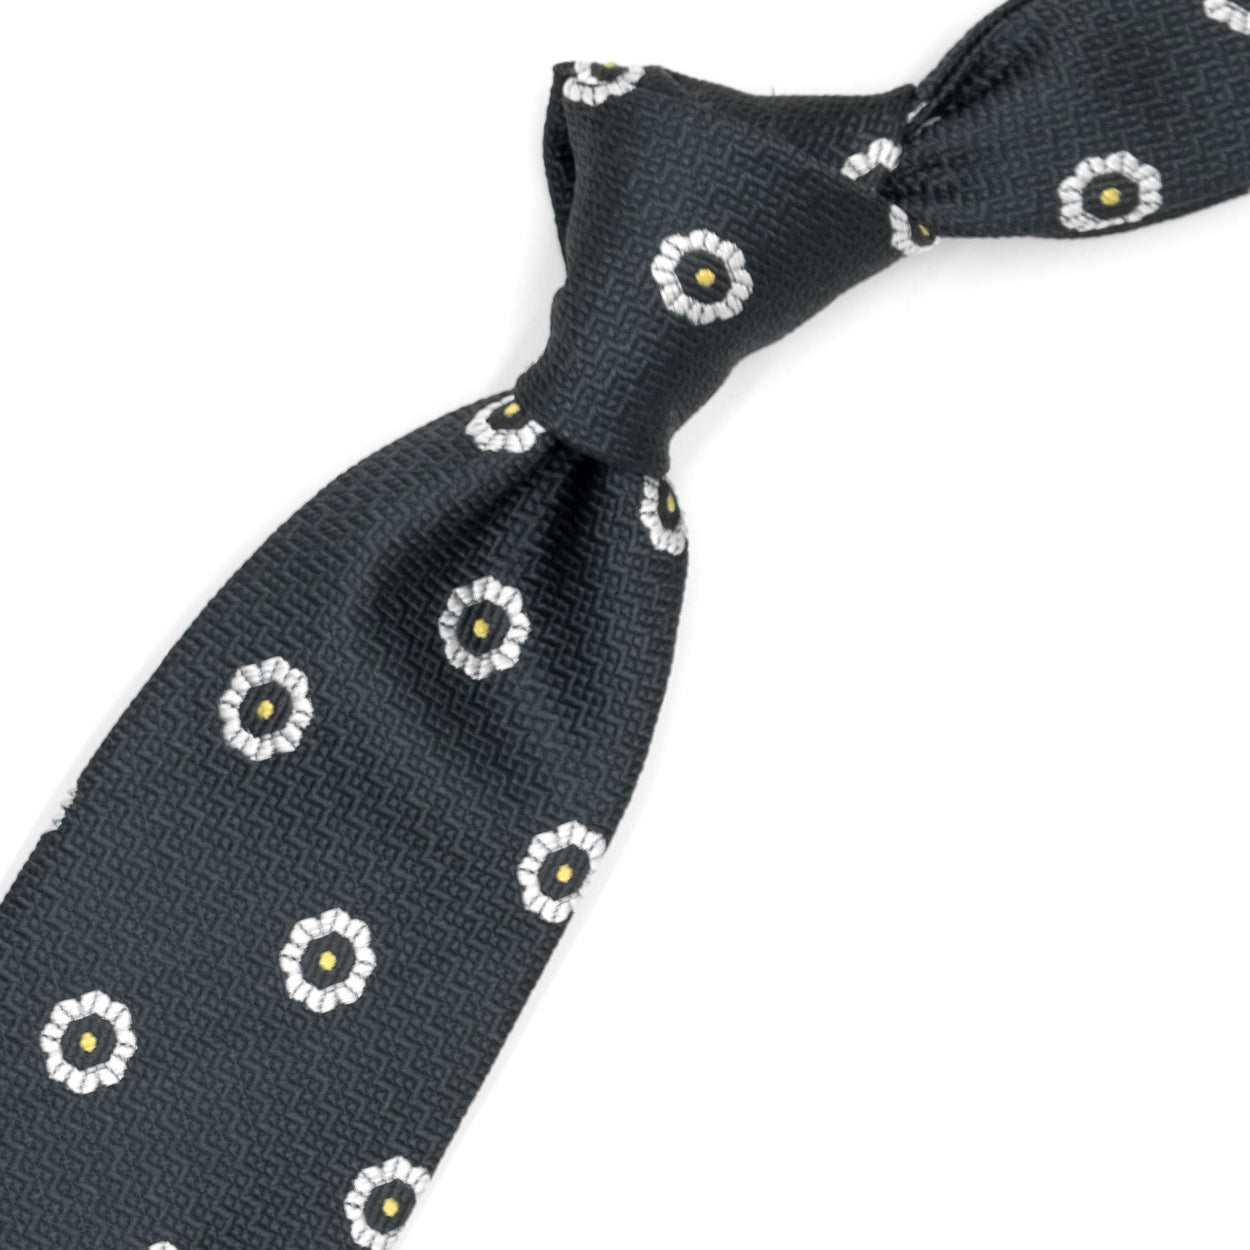 Grey tie with white flowers and yellow dots